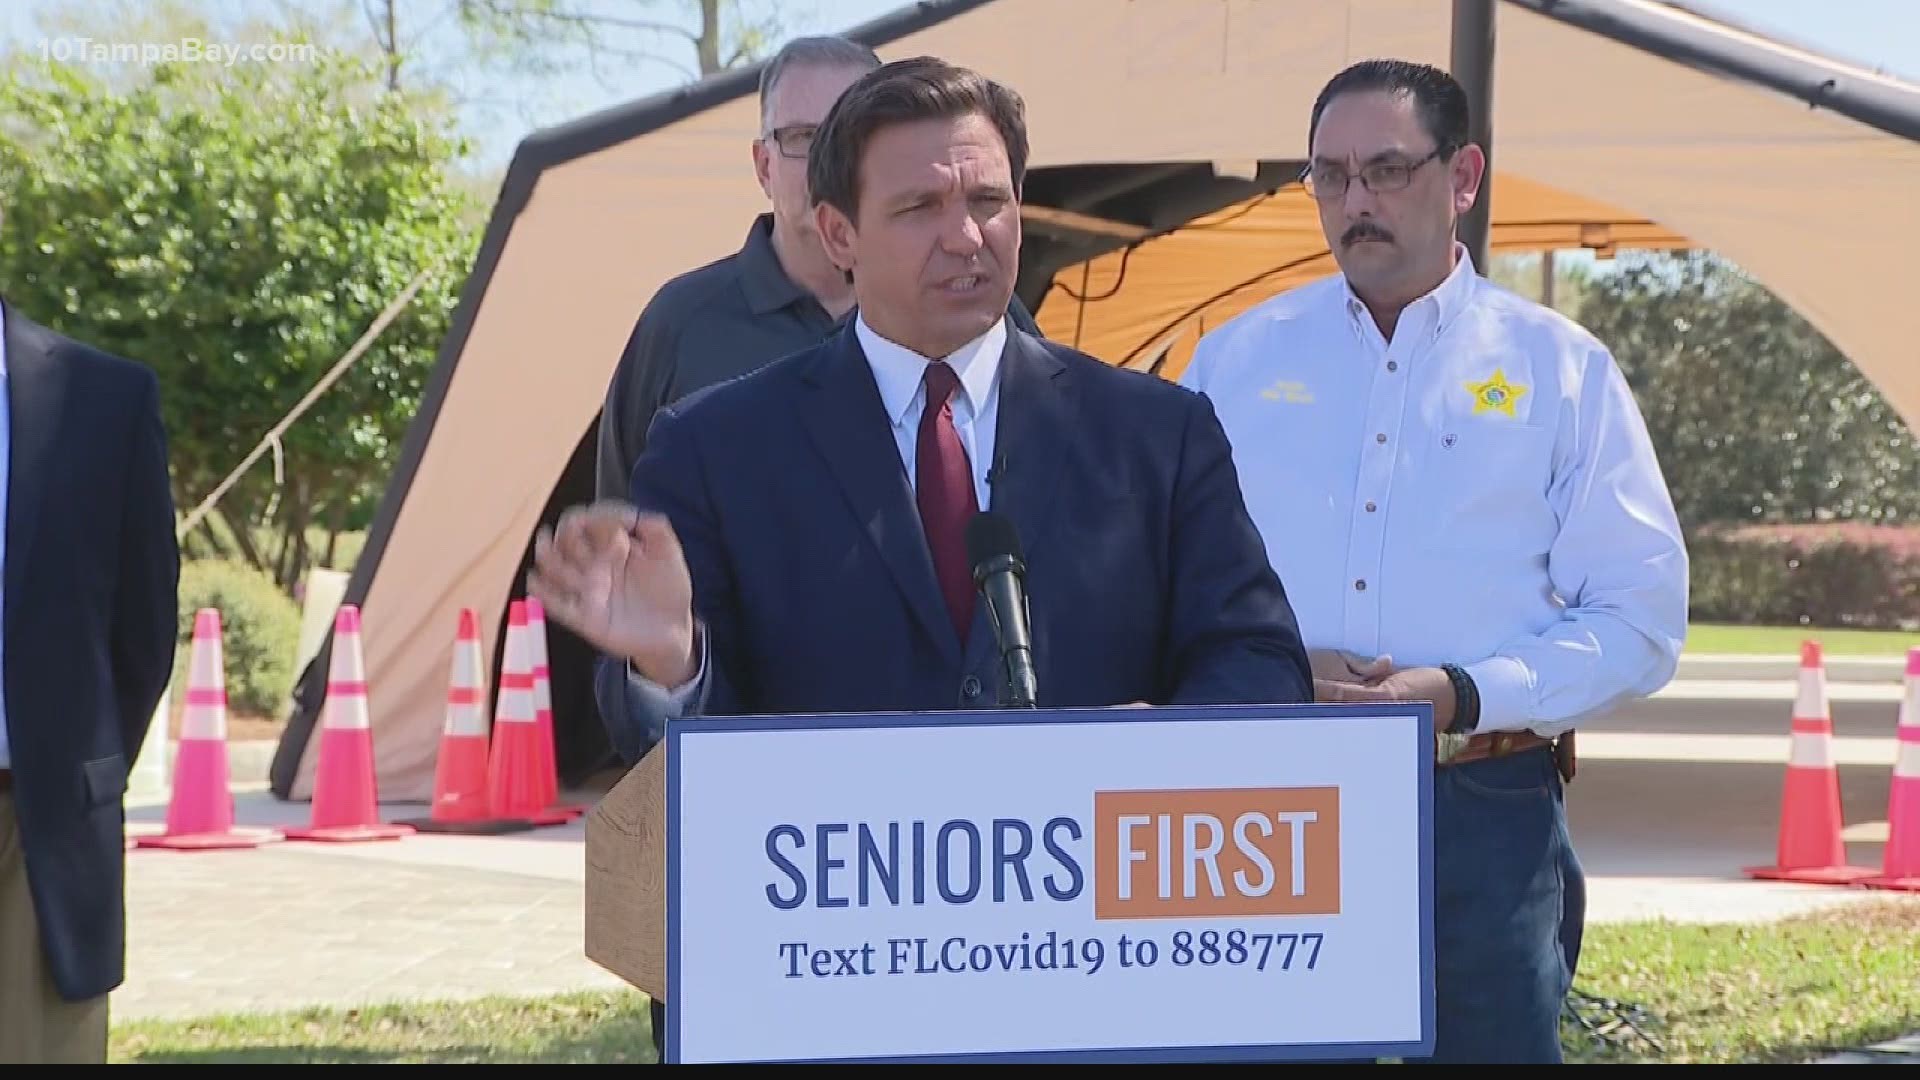 “…The next change is going to be lowering the age from 65, down to either 60 or 55,” Governor Ron DeSantis said during a news conference on Friday.